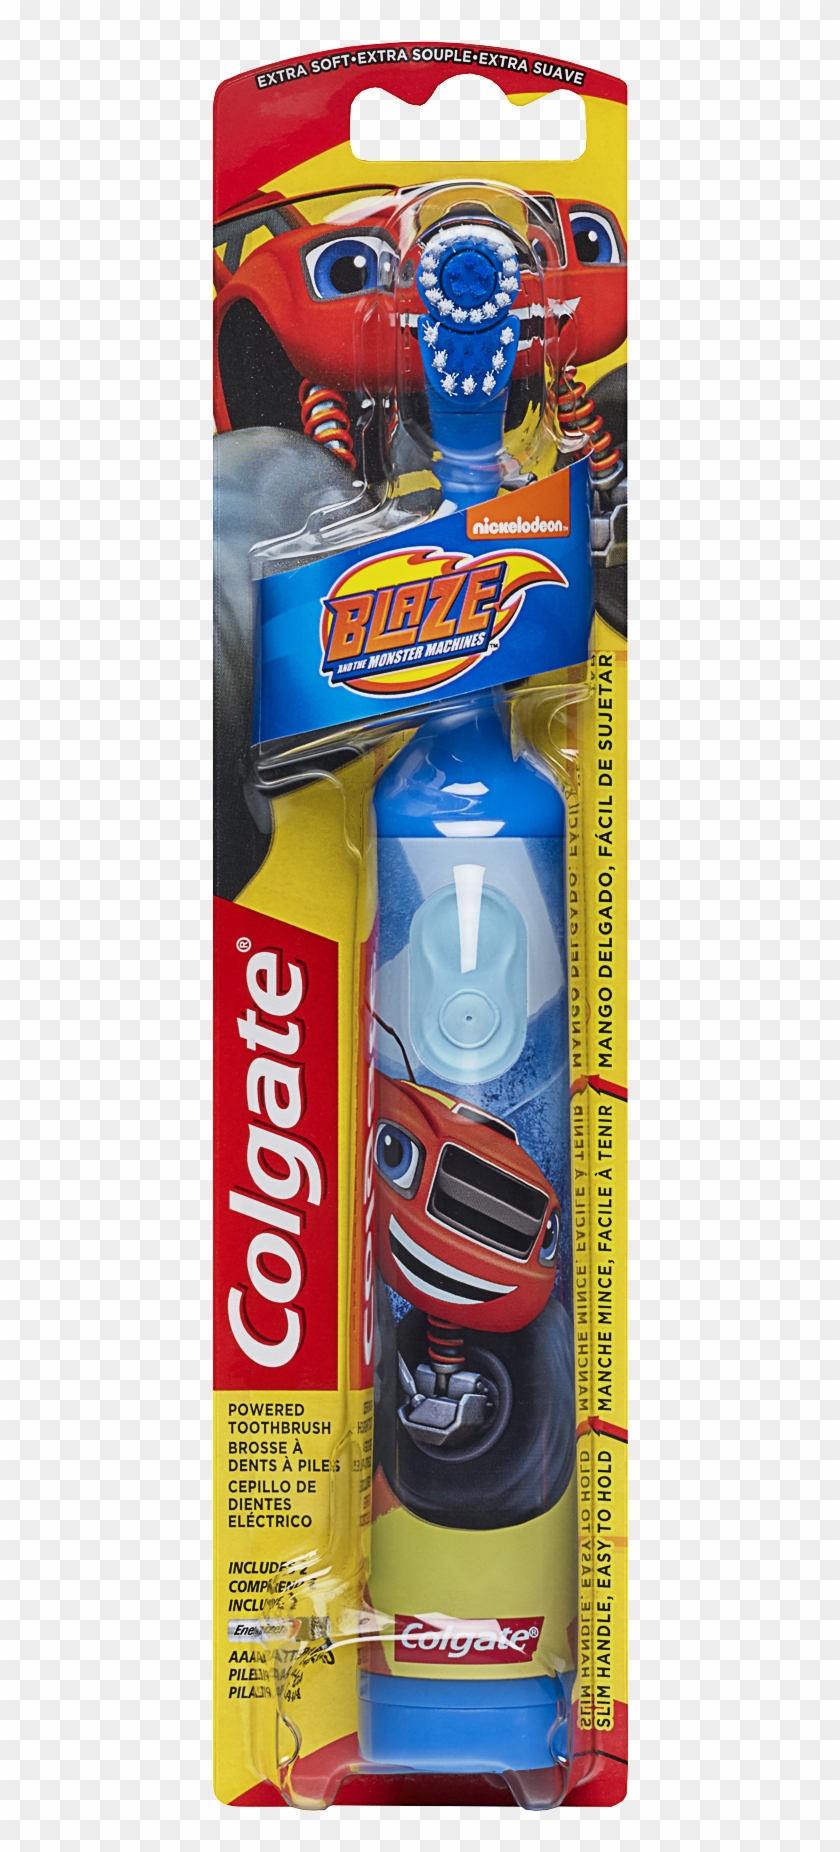 Colgate Kids Powered Toothbrush, Blaze And The Monster - Colgate #617152